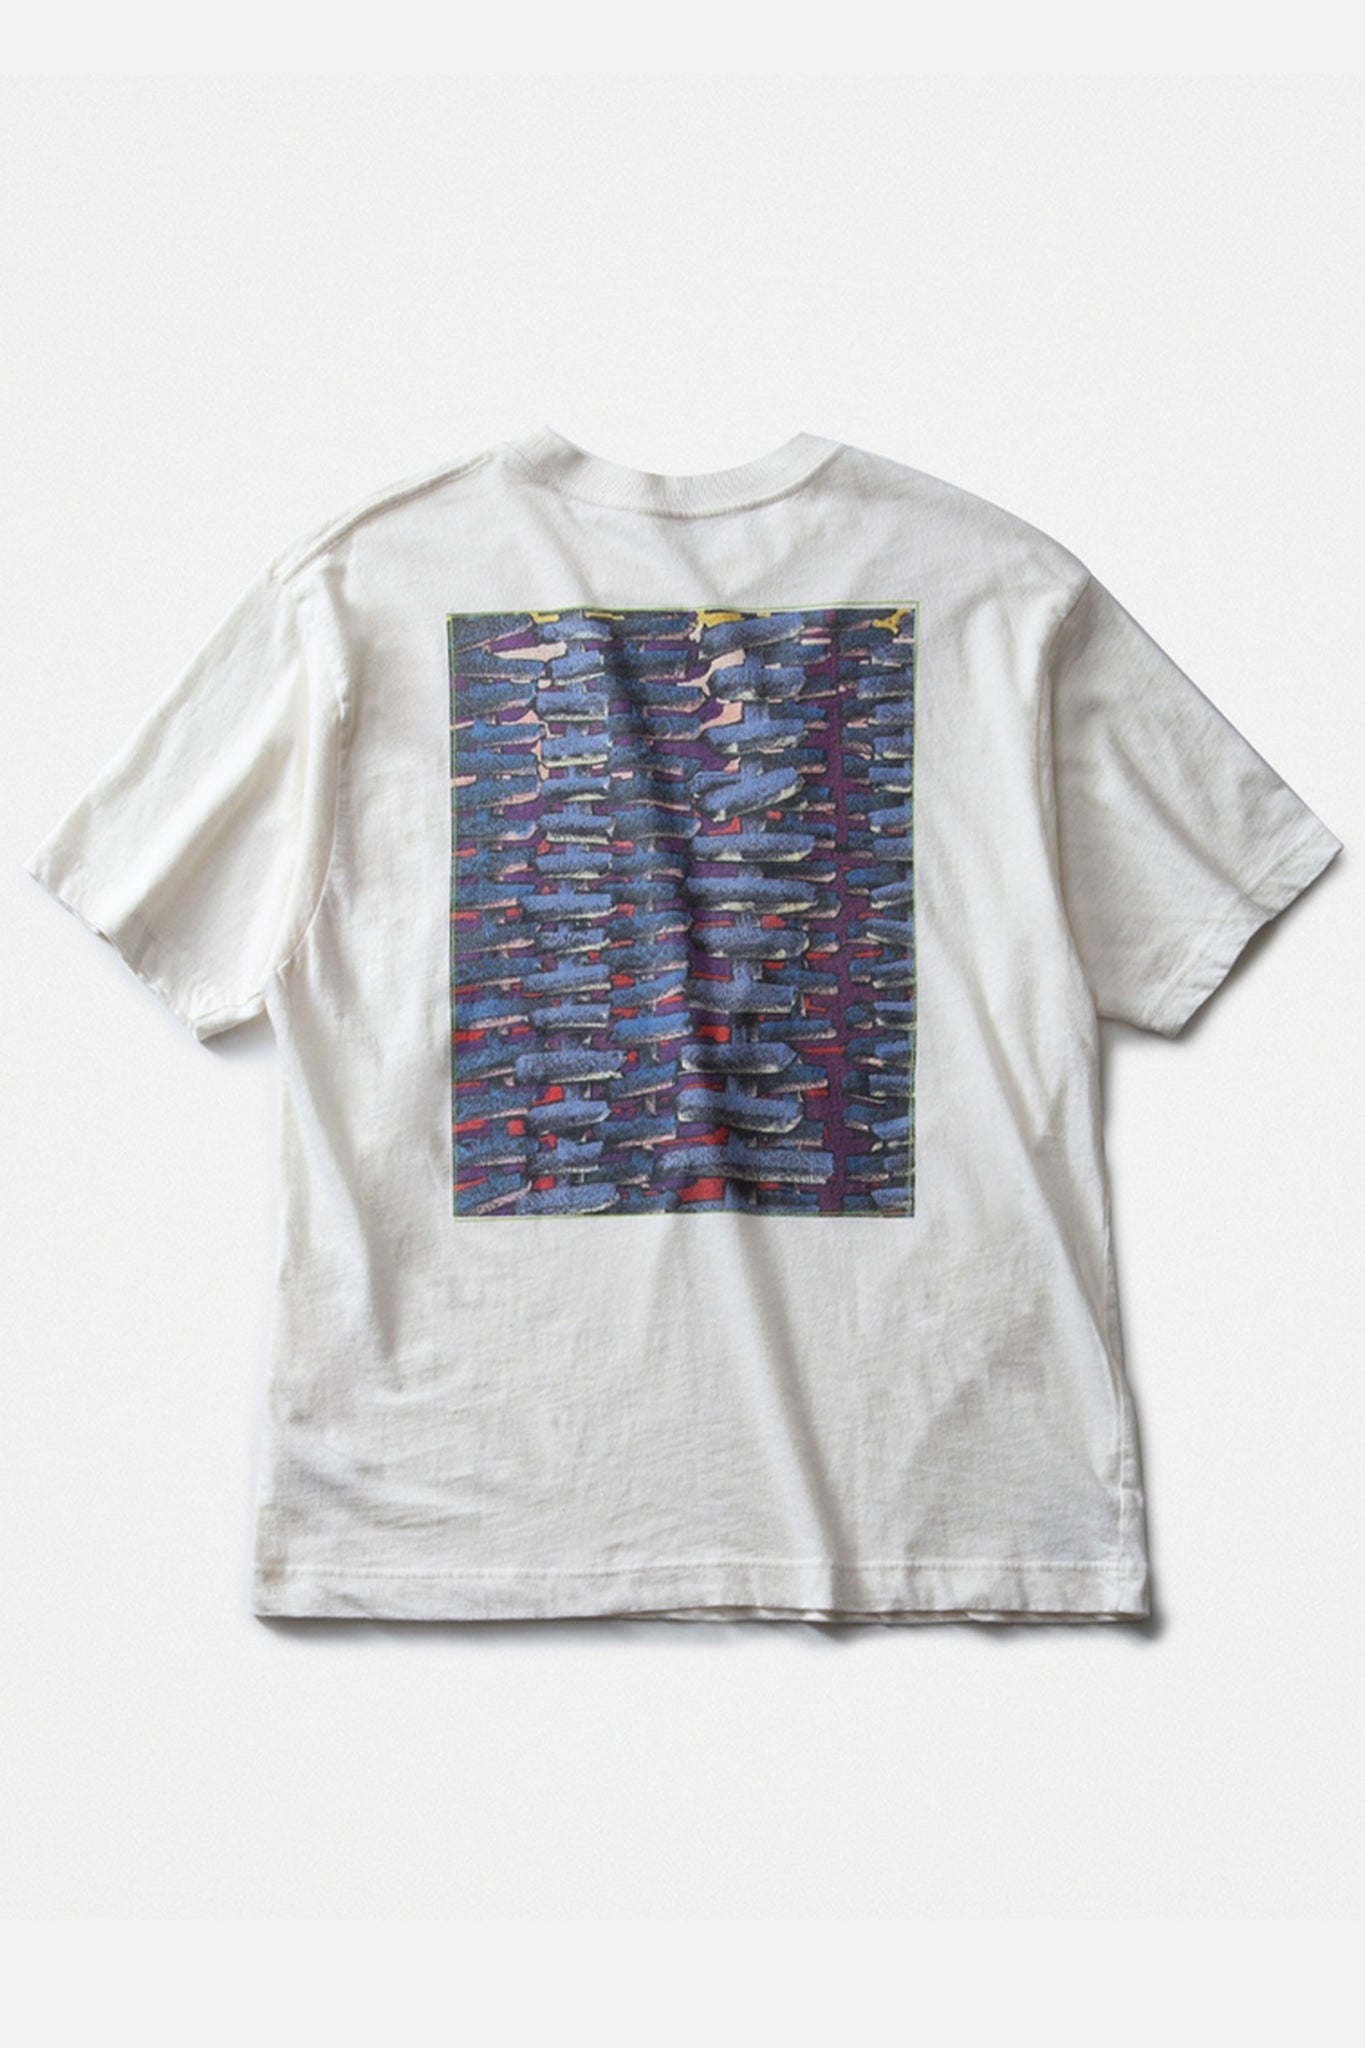 THE INOUE BROTHERS... "JULIEN COLOMBIER INTERACTION MULTIPLE T-SHIRT / WHITE"